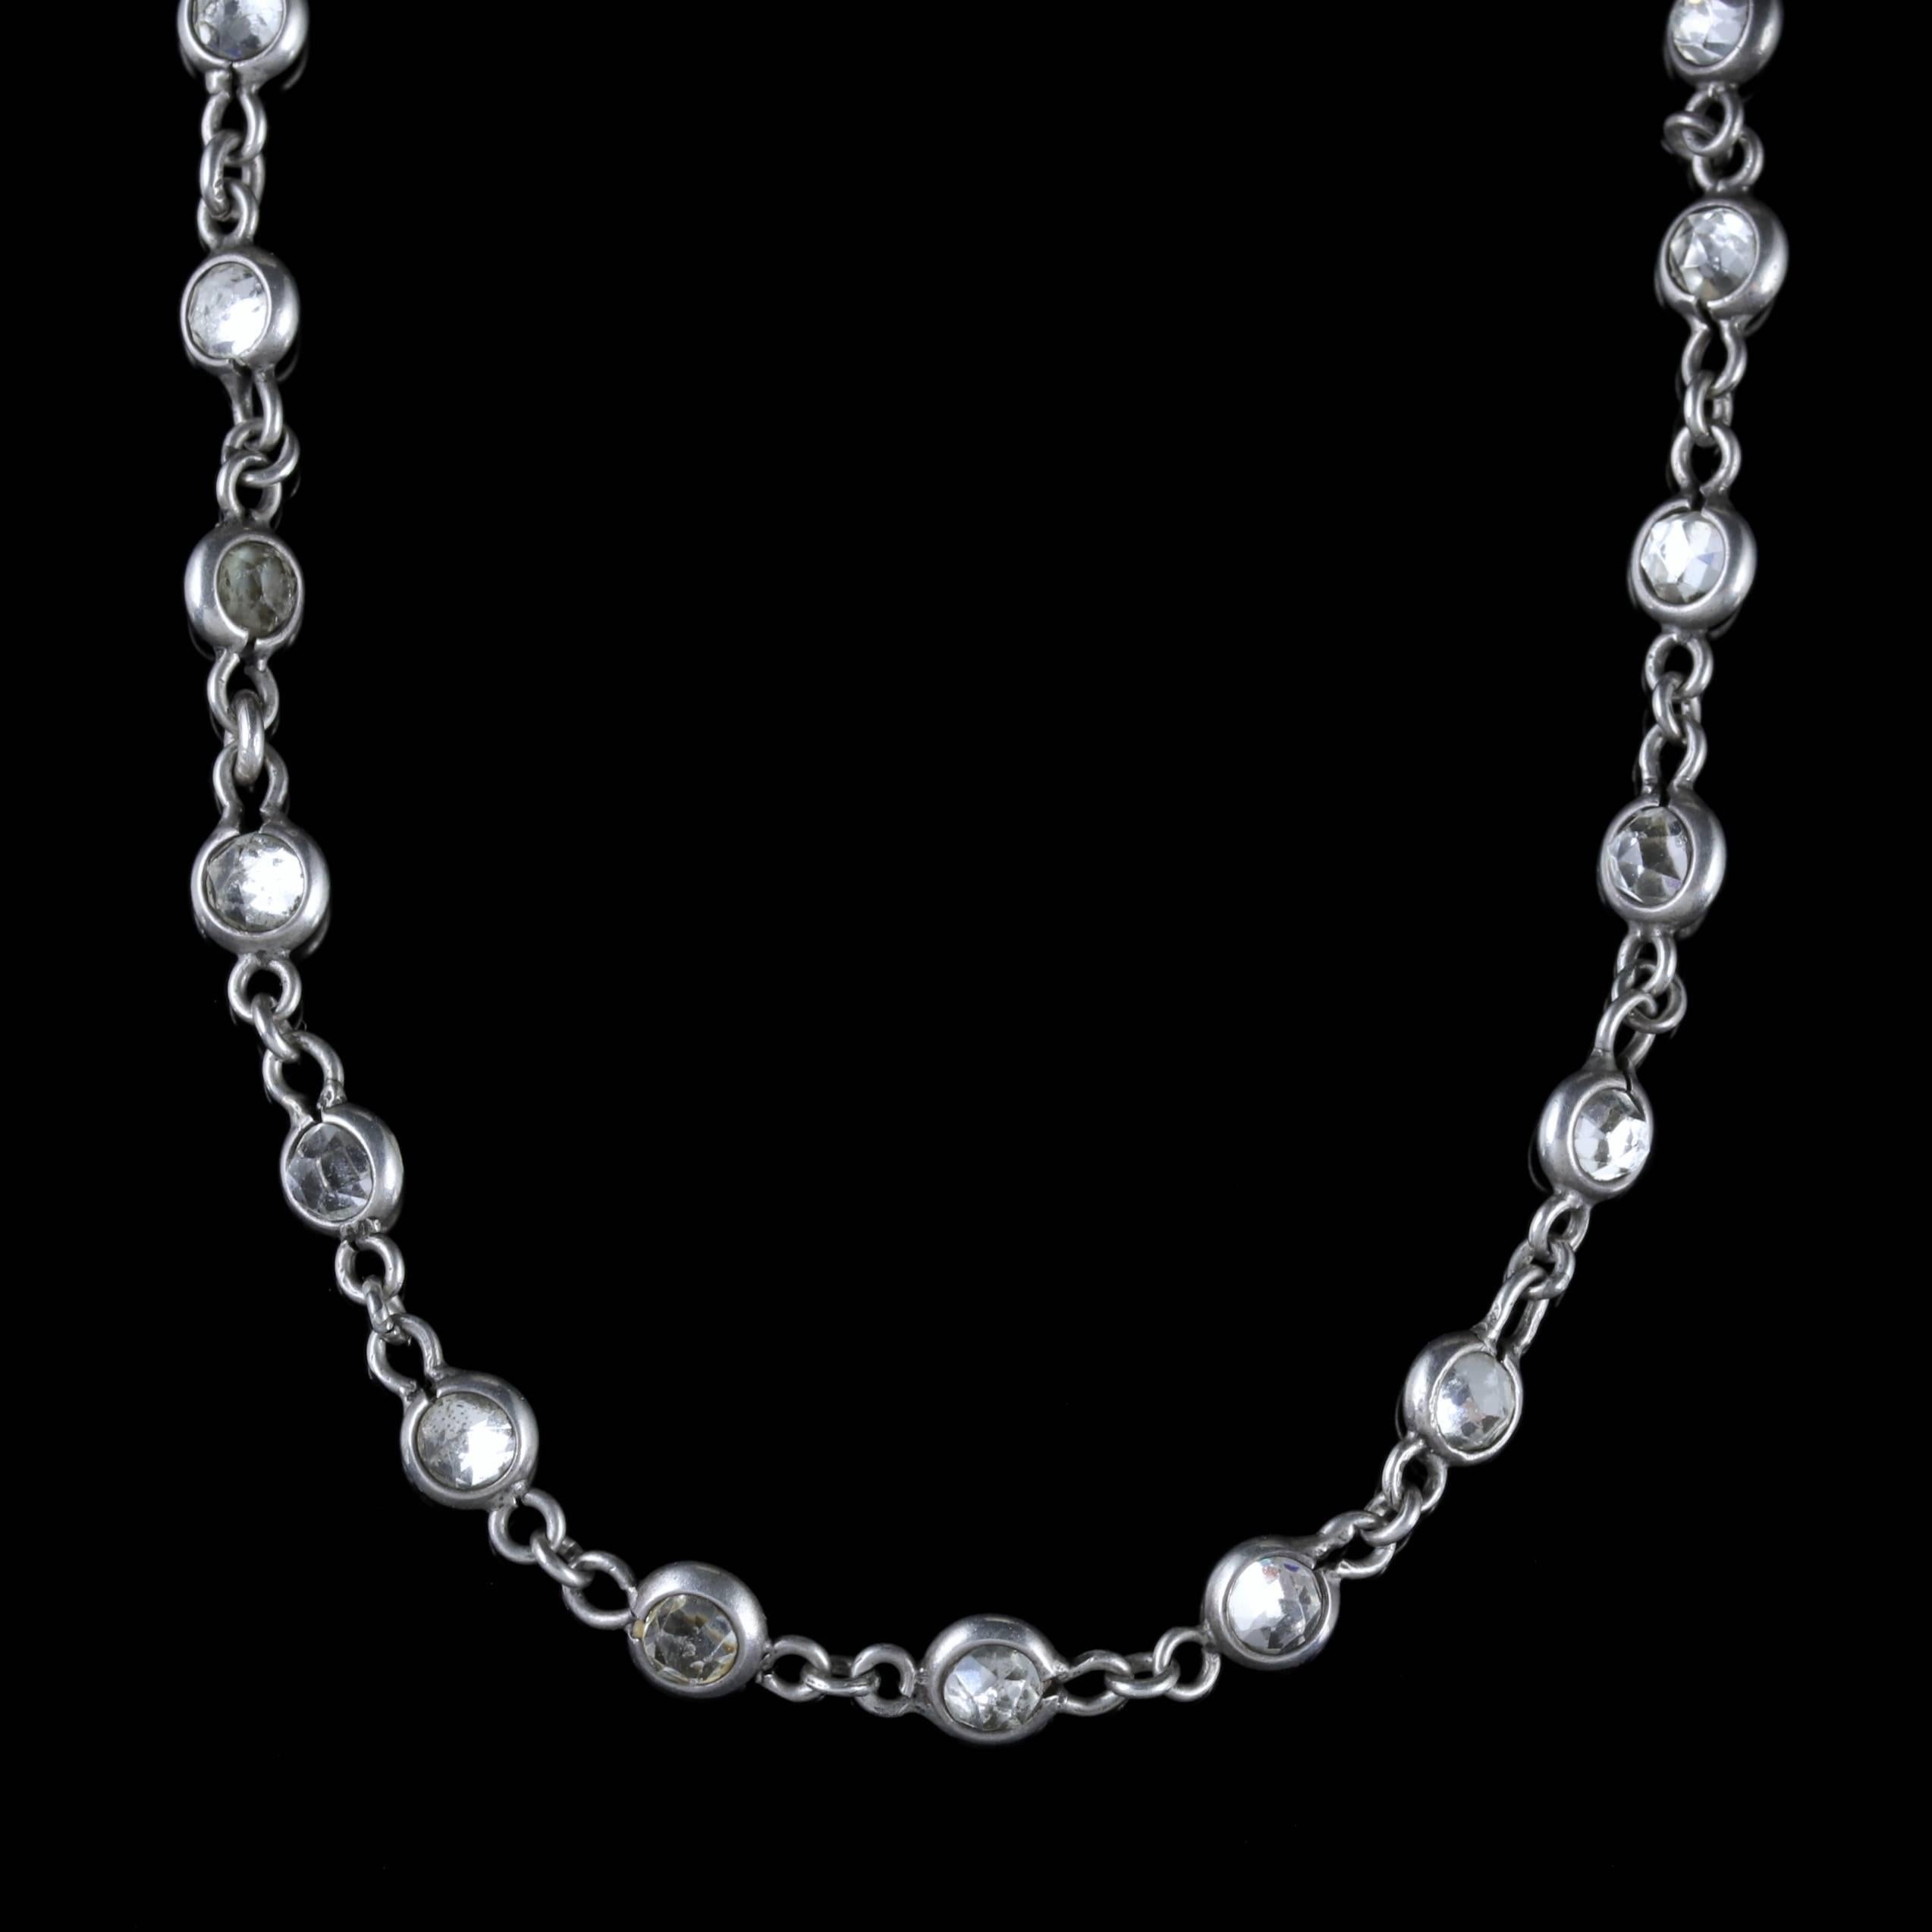 To read more please click continue reading below-

This stunning long antique Silver chain is a genuine Victorian piece, Circa 1900. 

The fabulous long necklace is adorned with sparkling Crystal balls set into Silver links. 

The necklace displays